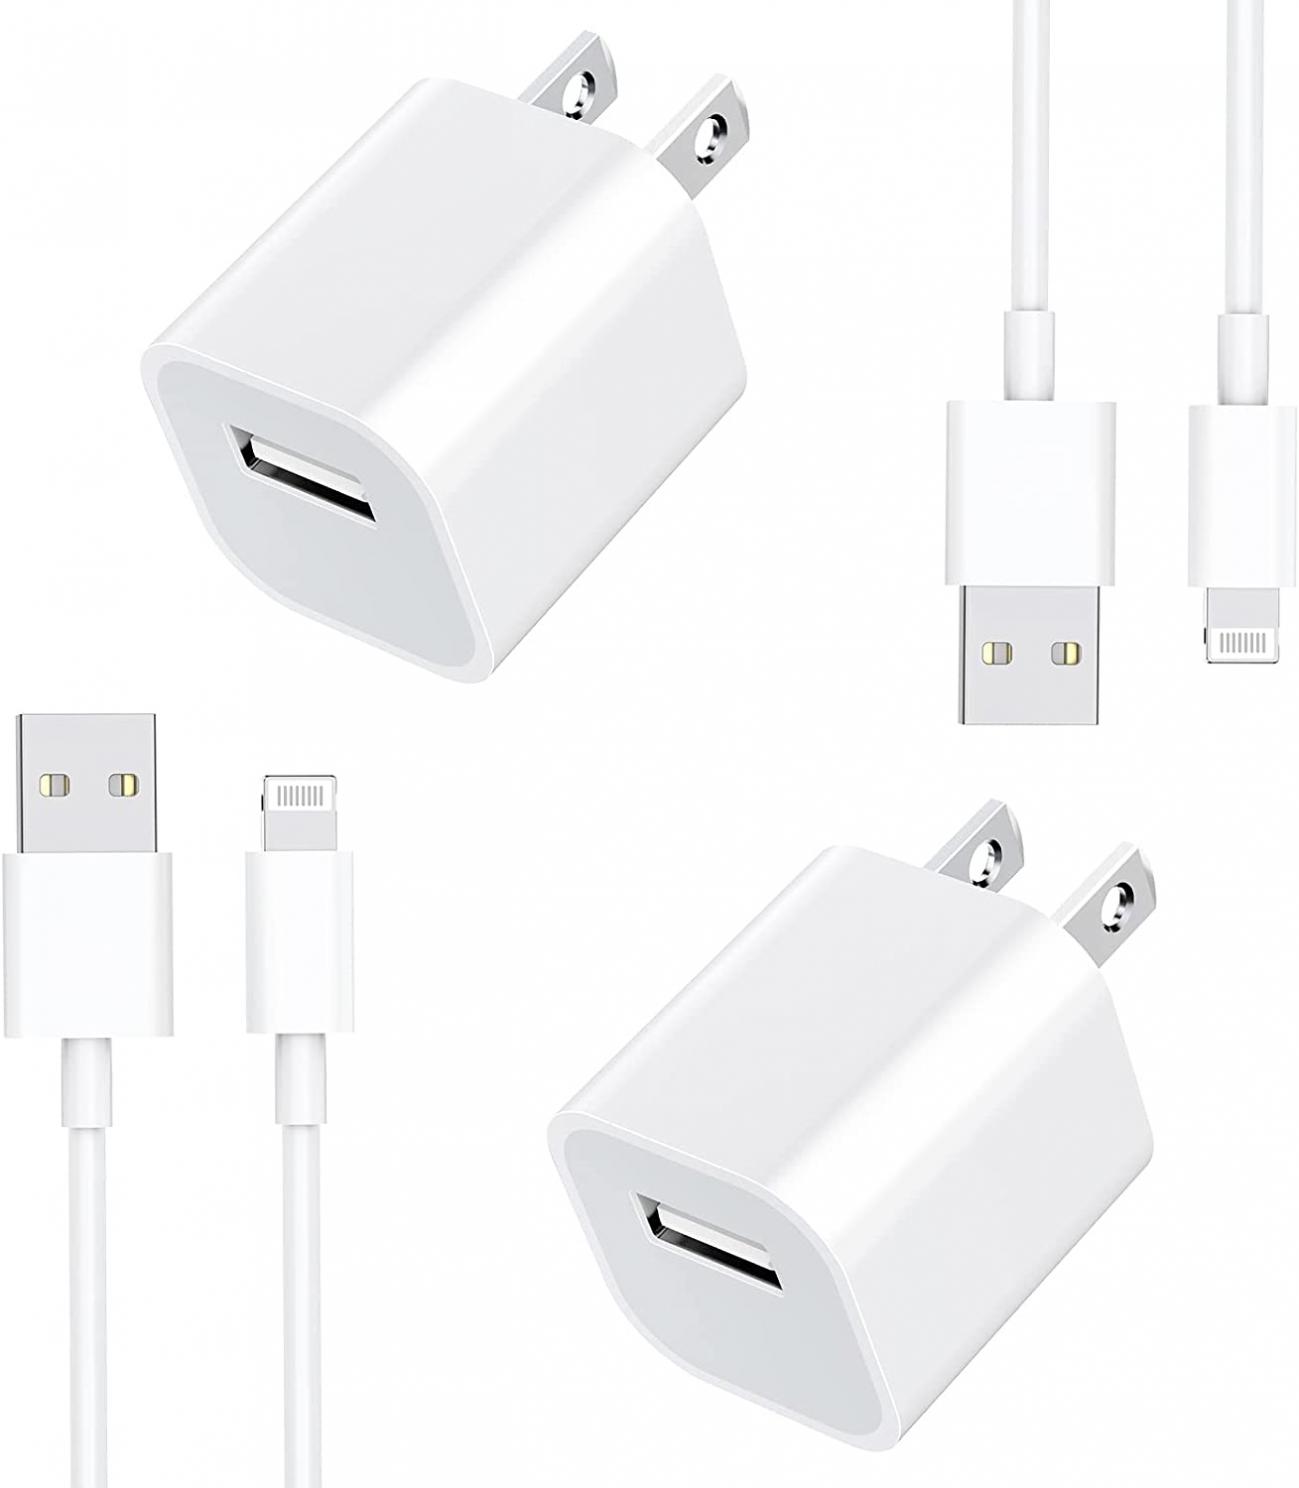 [Apple MFi Certified] iPhone Fast Charger, GEONAV 2 Pack 3FT Lightning to USB Quick Charging Data Sync Transfer Cable with USB Power Rapid Wall Charger Travel Plug Compatible for iPhone/iPad/AirPods